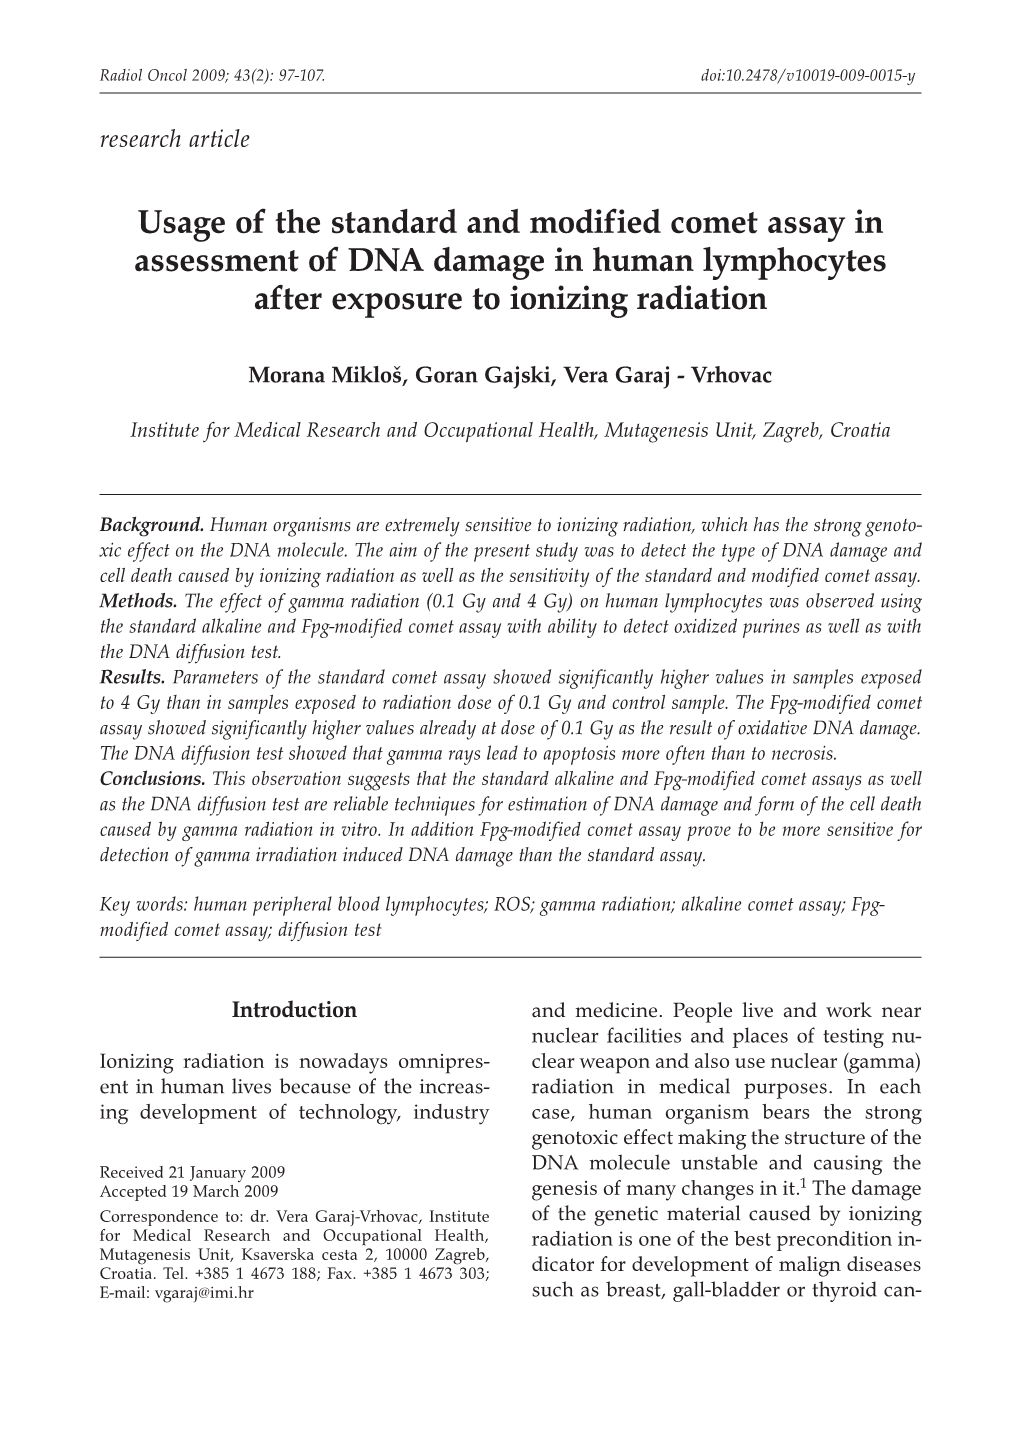 Usage of the Standard and Modified Comet Assay in Assessment of DNA Damage in Human Lymphocytes After Exposure to Ionizing Radiation